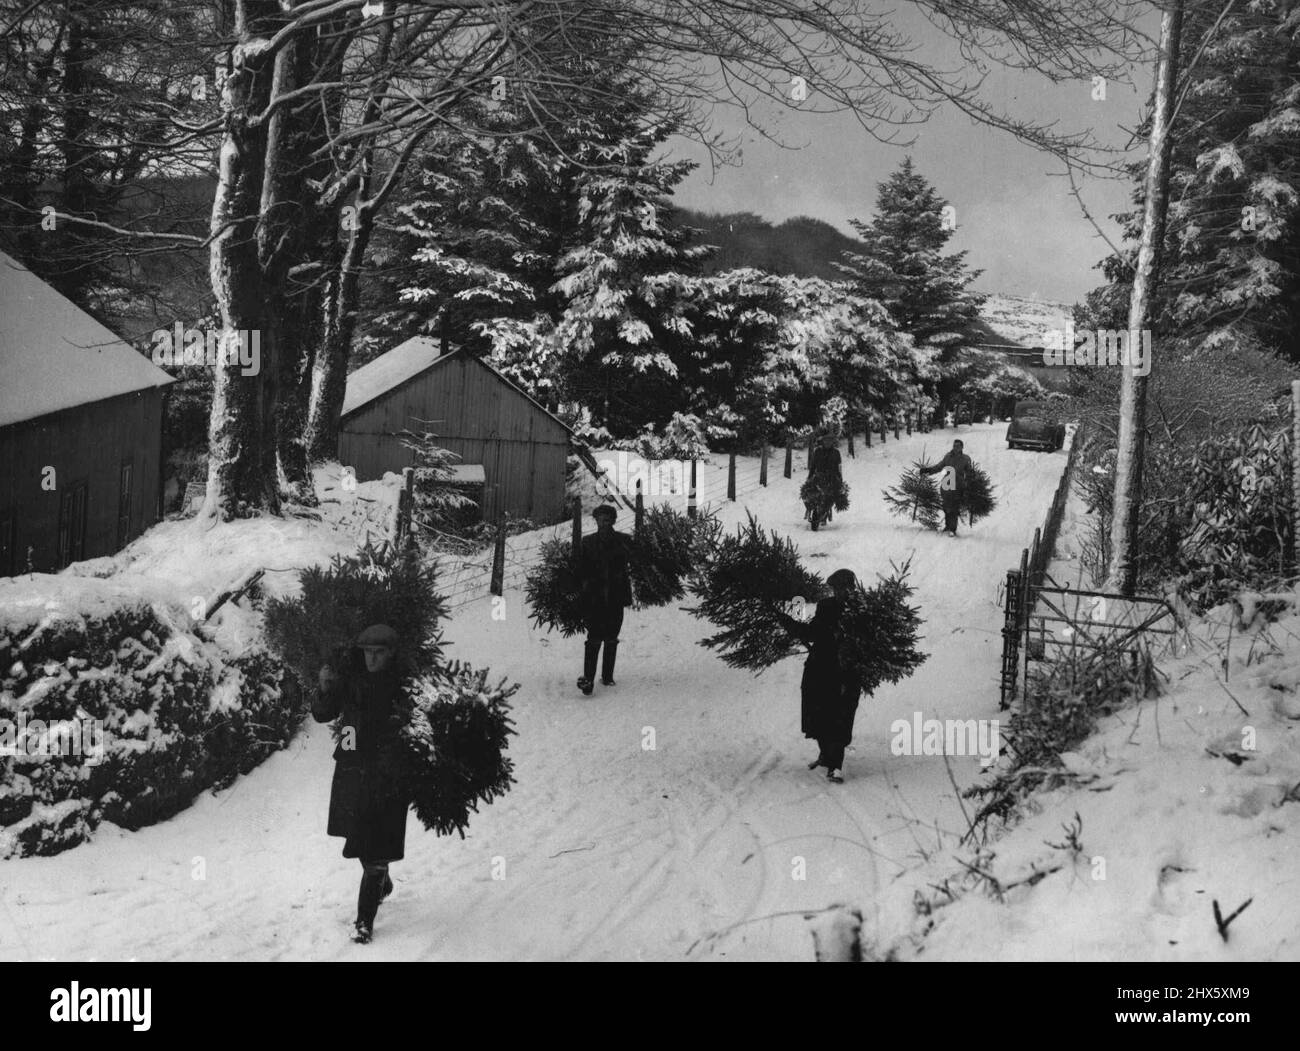 Bringing In The Christmas Trees. The snow covered country ***** provides a real Christmas scene in this ***** of foresters bringing in the Christmas trees. At Burrator on Dartmoor. ***** are cut here to supply ***** in Plymouth. Yet in Plymouth itself people ***** of them. January 08, 1951.;Bringing In The Christmas Trees. The snow covered country ***** provides a real Christmas scene in this ***** of foresters bringing in the Christmas trees. At Burrator on Dartmoor. ***** are cut here to suppl Stock Photo